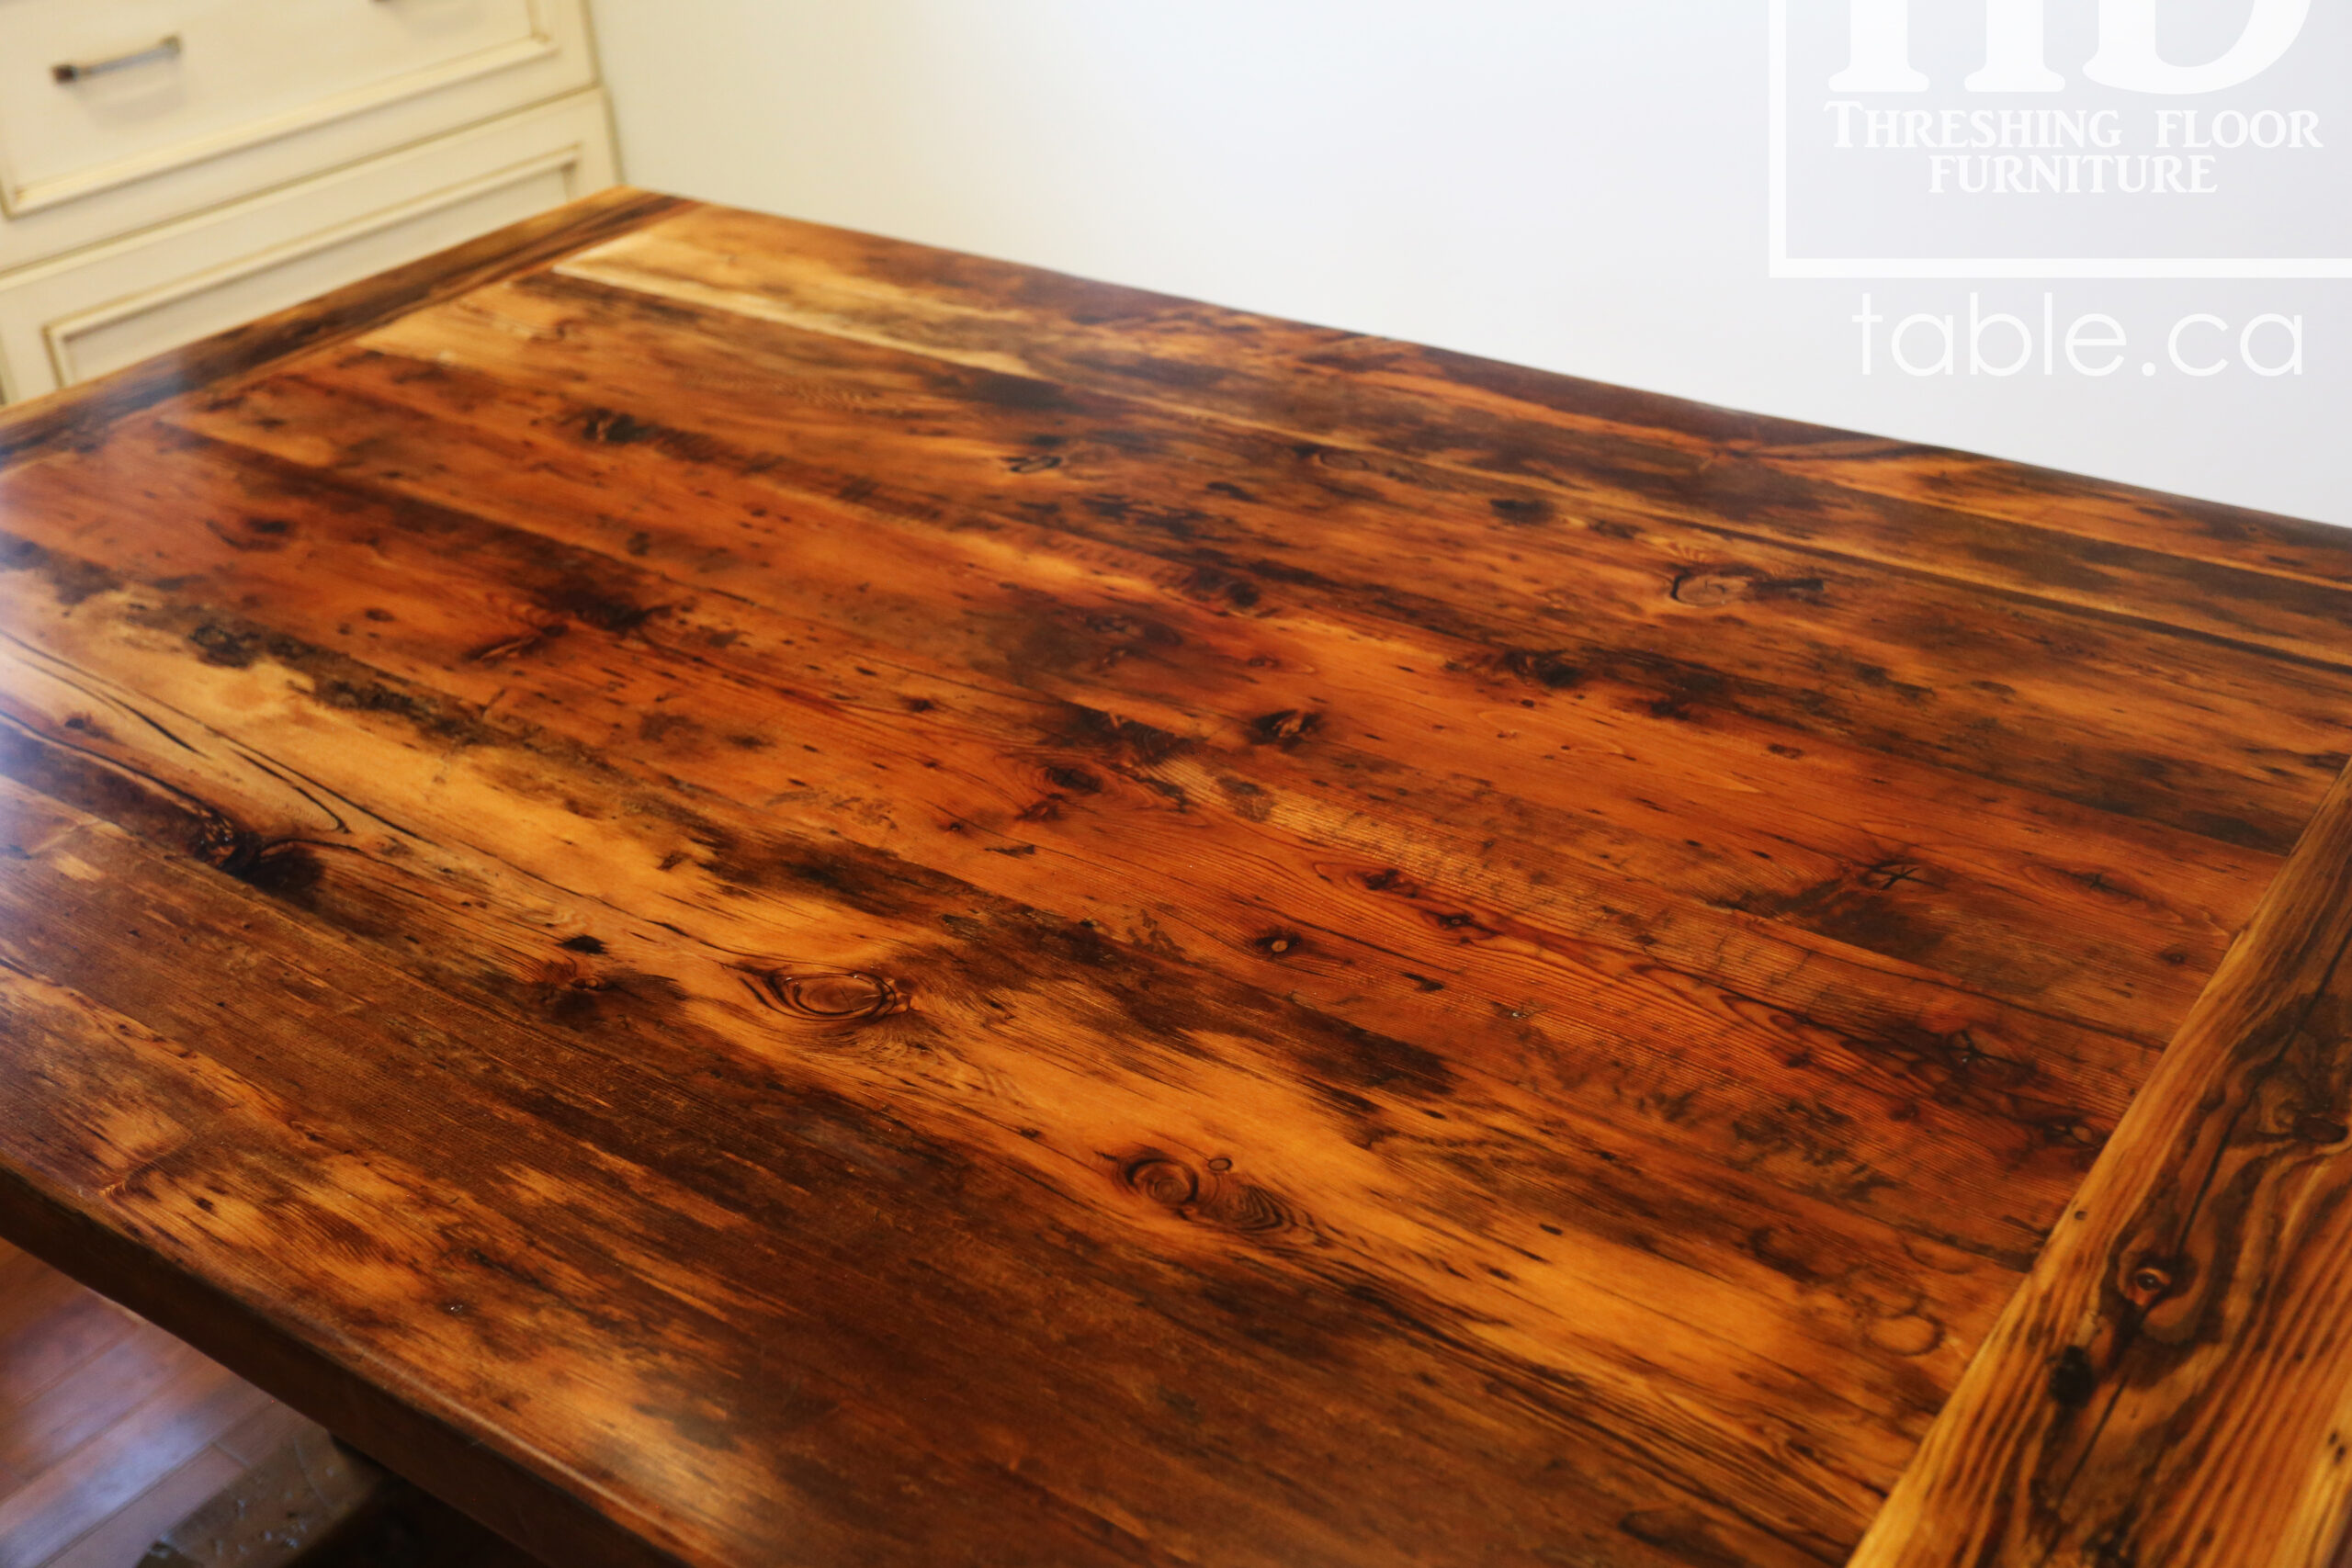 5' 2" Reclaimed Wood Table we made for a Breslau, Ontario home - 42" wide - Trestle Base - Old Growth Hemlock Threshing Floor Construction - Original edges & distressing maintained - Premium epoxy + satin polyurethane finish - www.table.ca